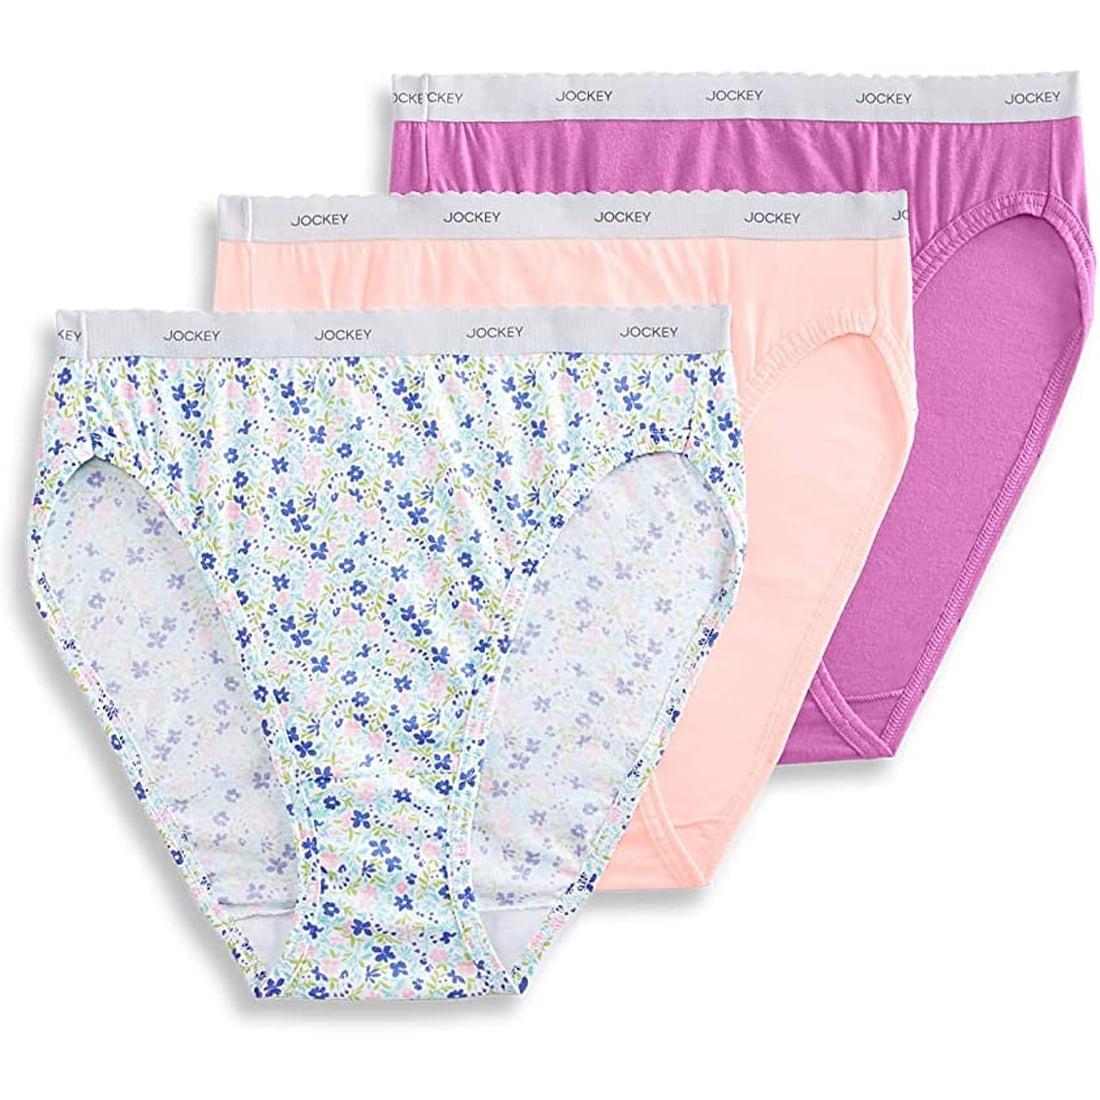 Jockey Women's 3 Pack Classic Fit Basic French Cut Briefs Underwear -  Extended Size